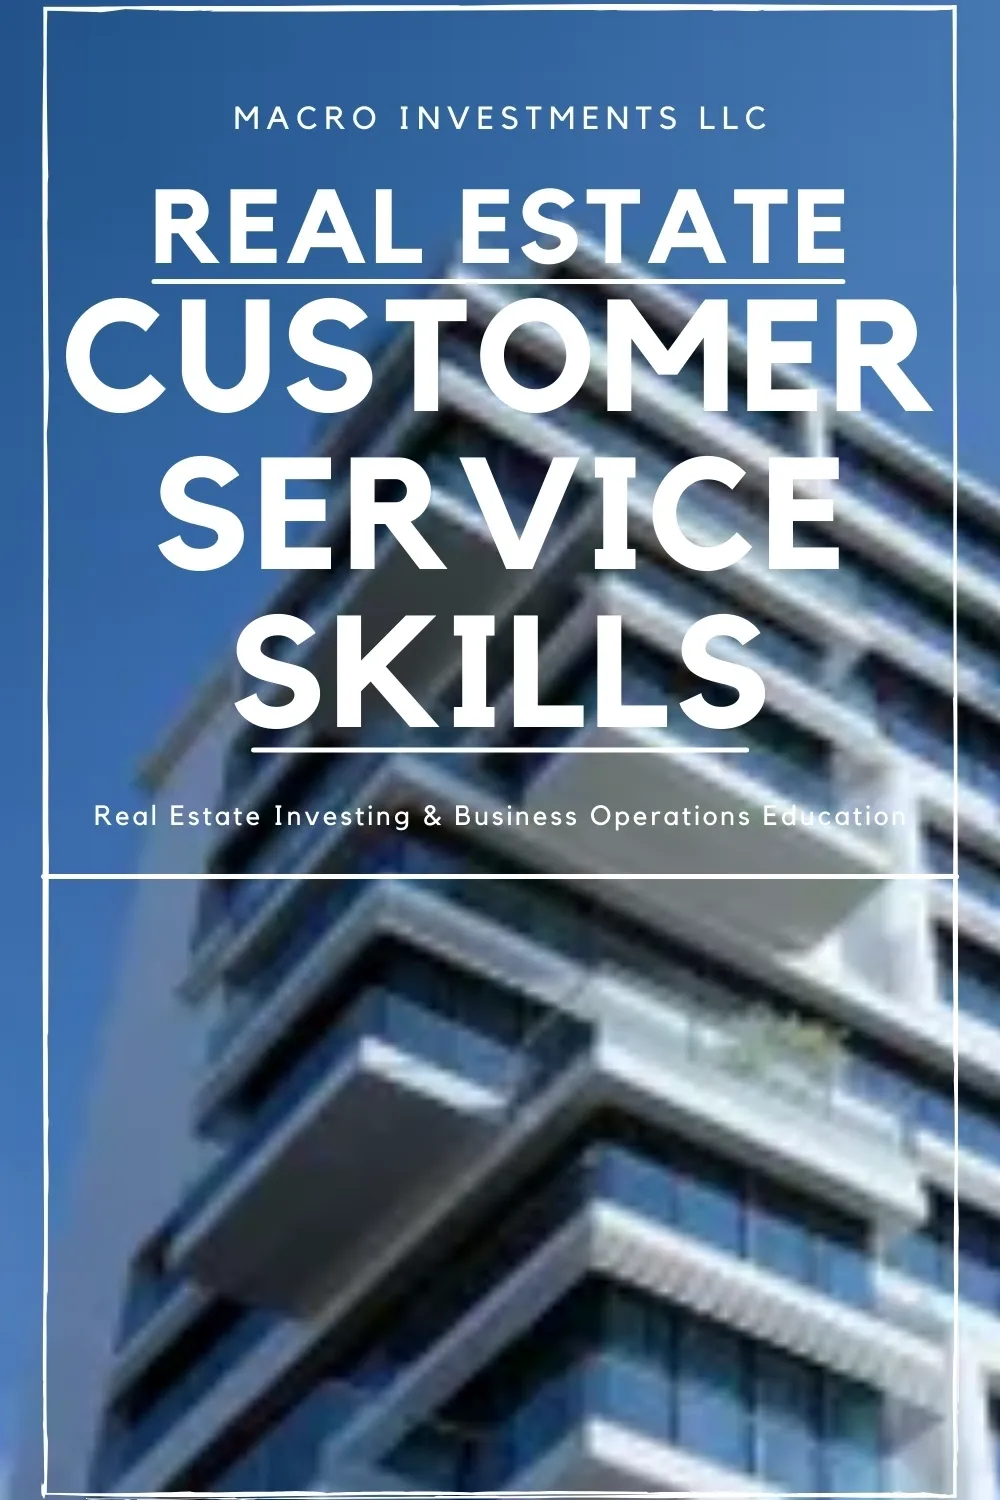 How Are Your Customer Service Skills in Real Estate? | Blog | InvestingTE.com